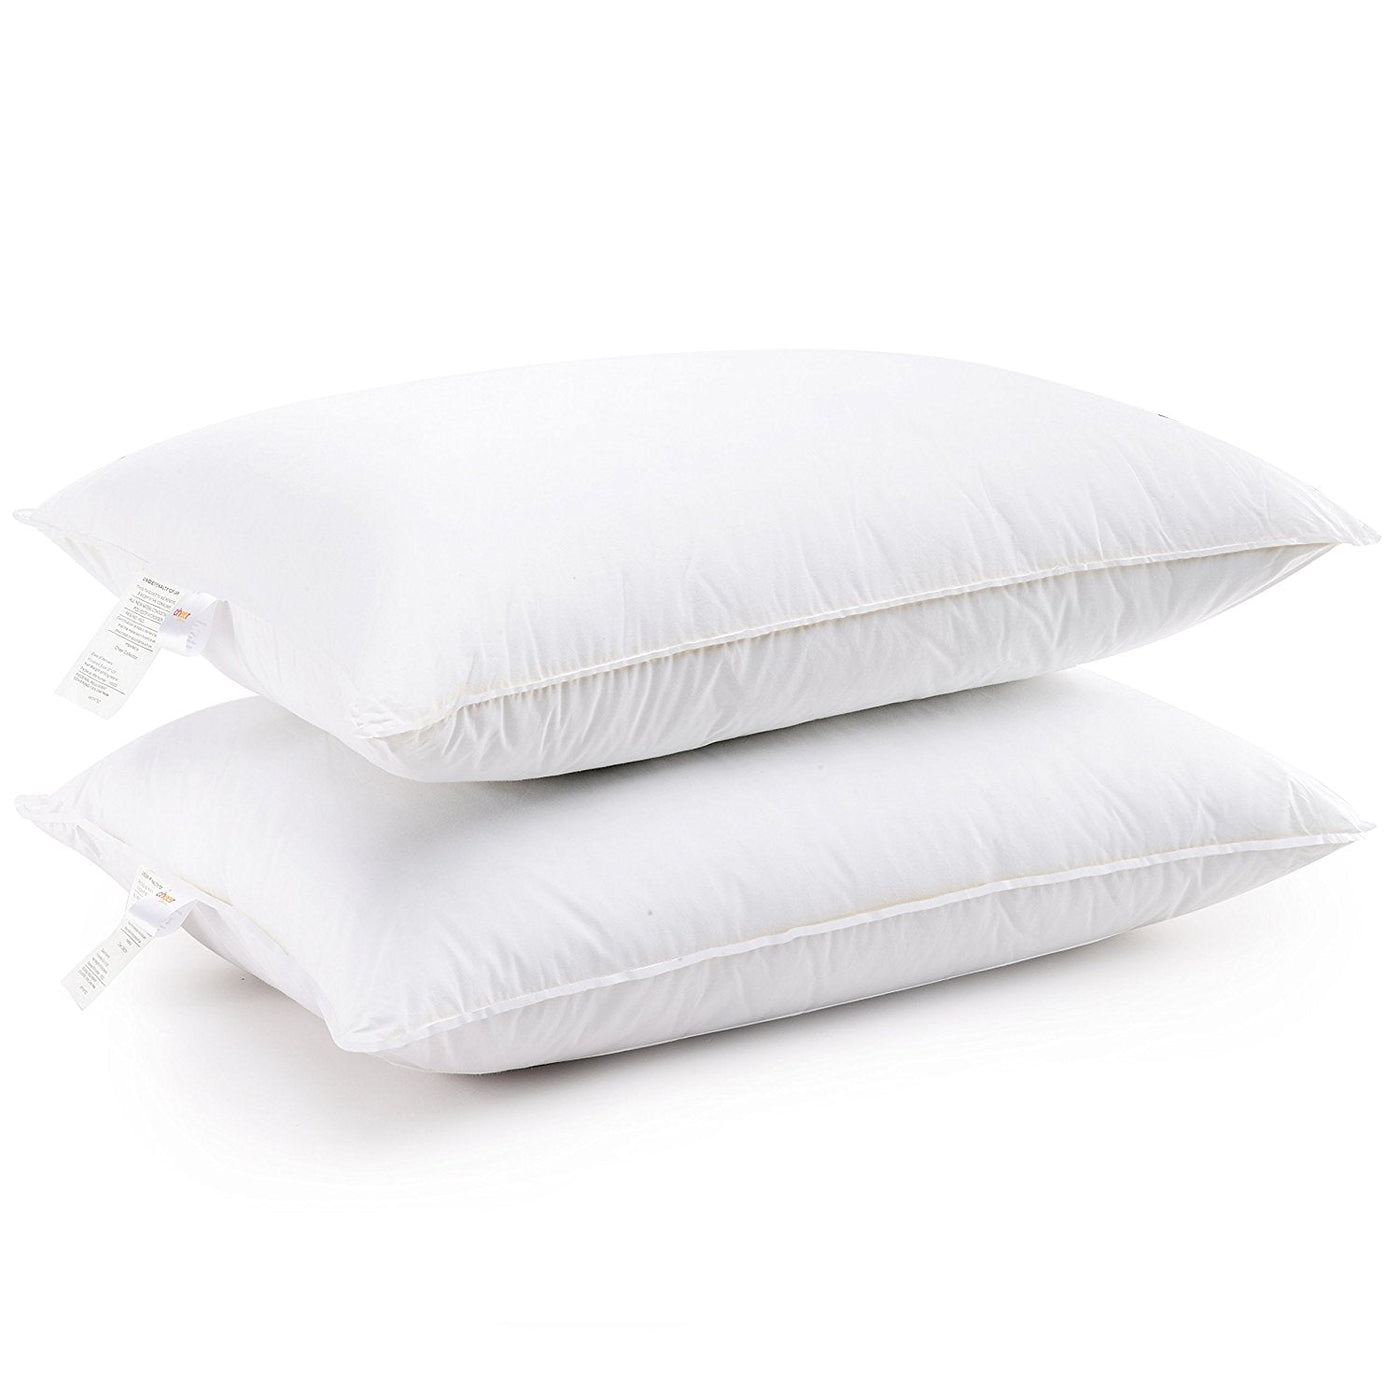 https://www.cheercollection.com/cdn/shop/products/cheer-collection-down-alternative-pillows-set-of-4-332658_1400x.jpg?v=1671781108